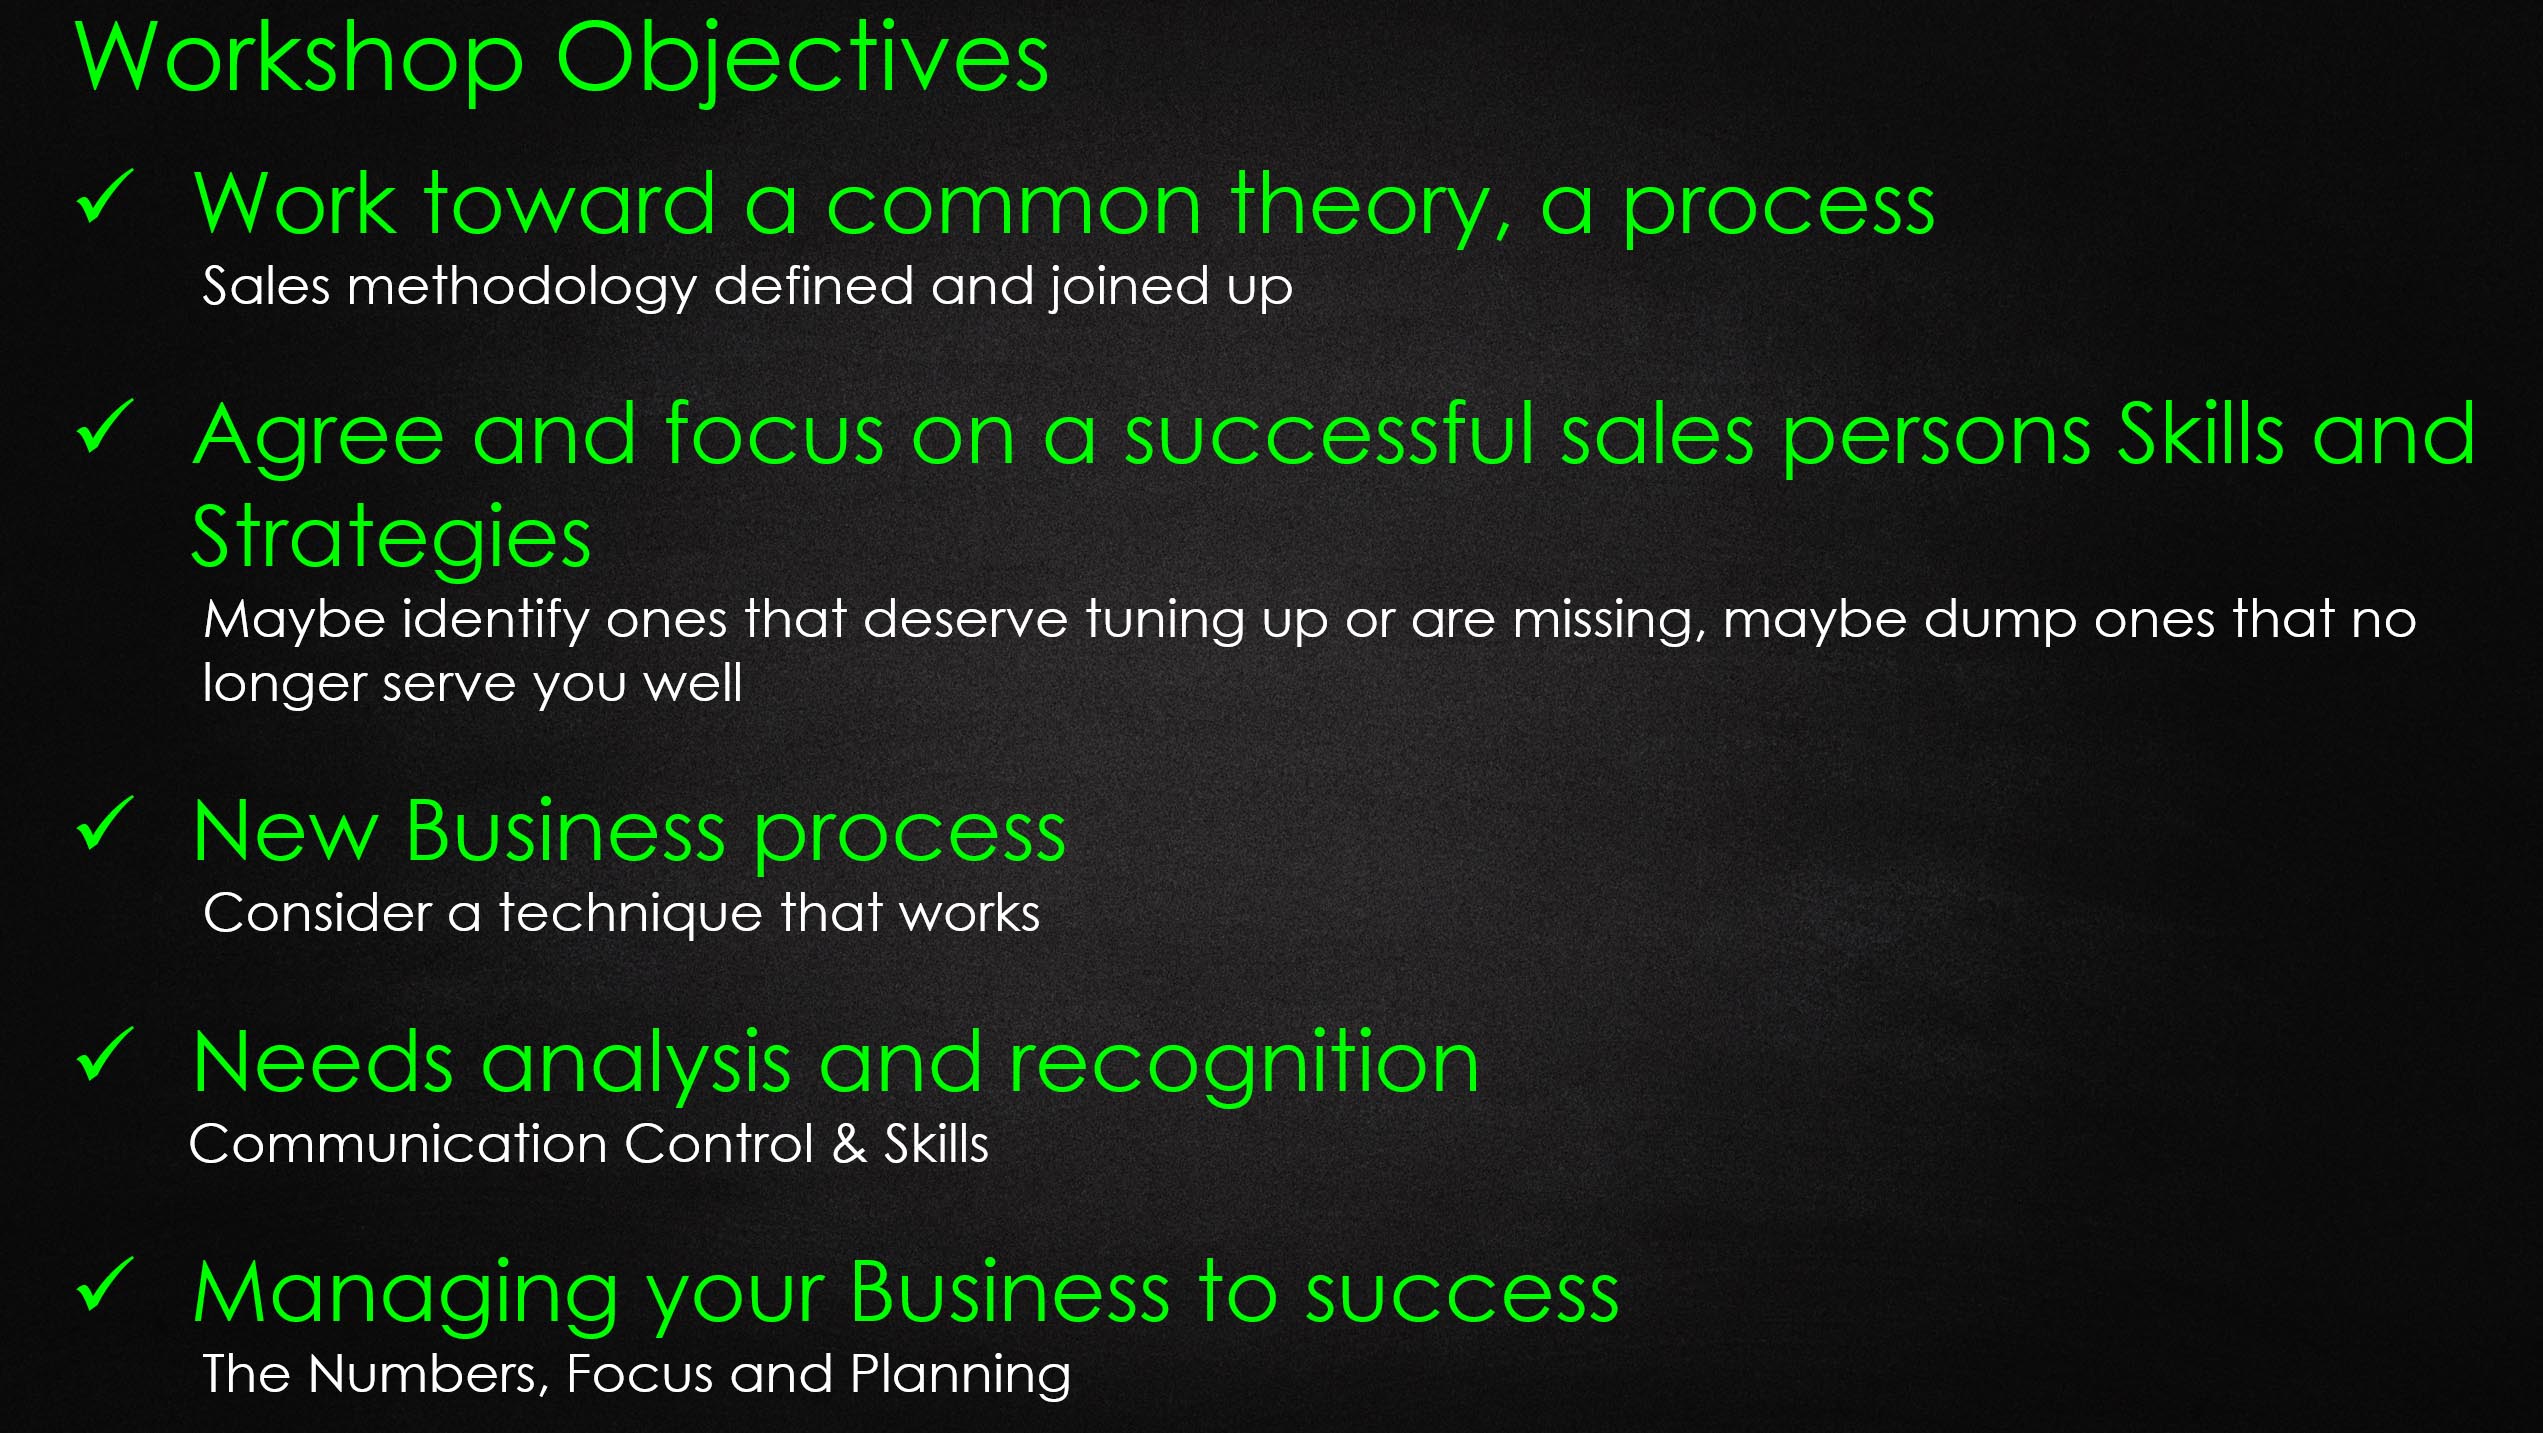 Value and Professional selling workshop objectives